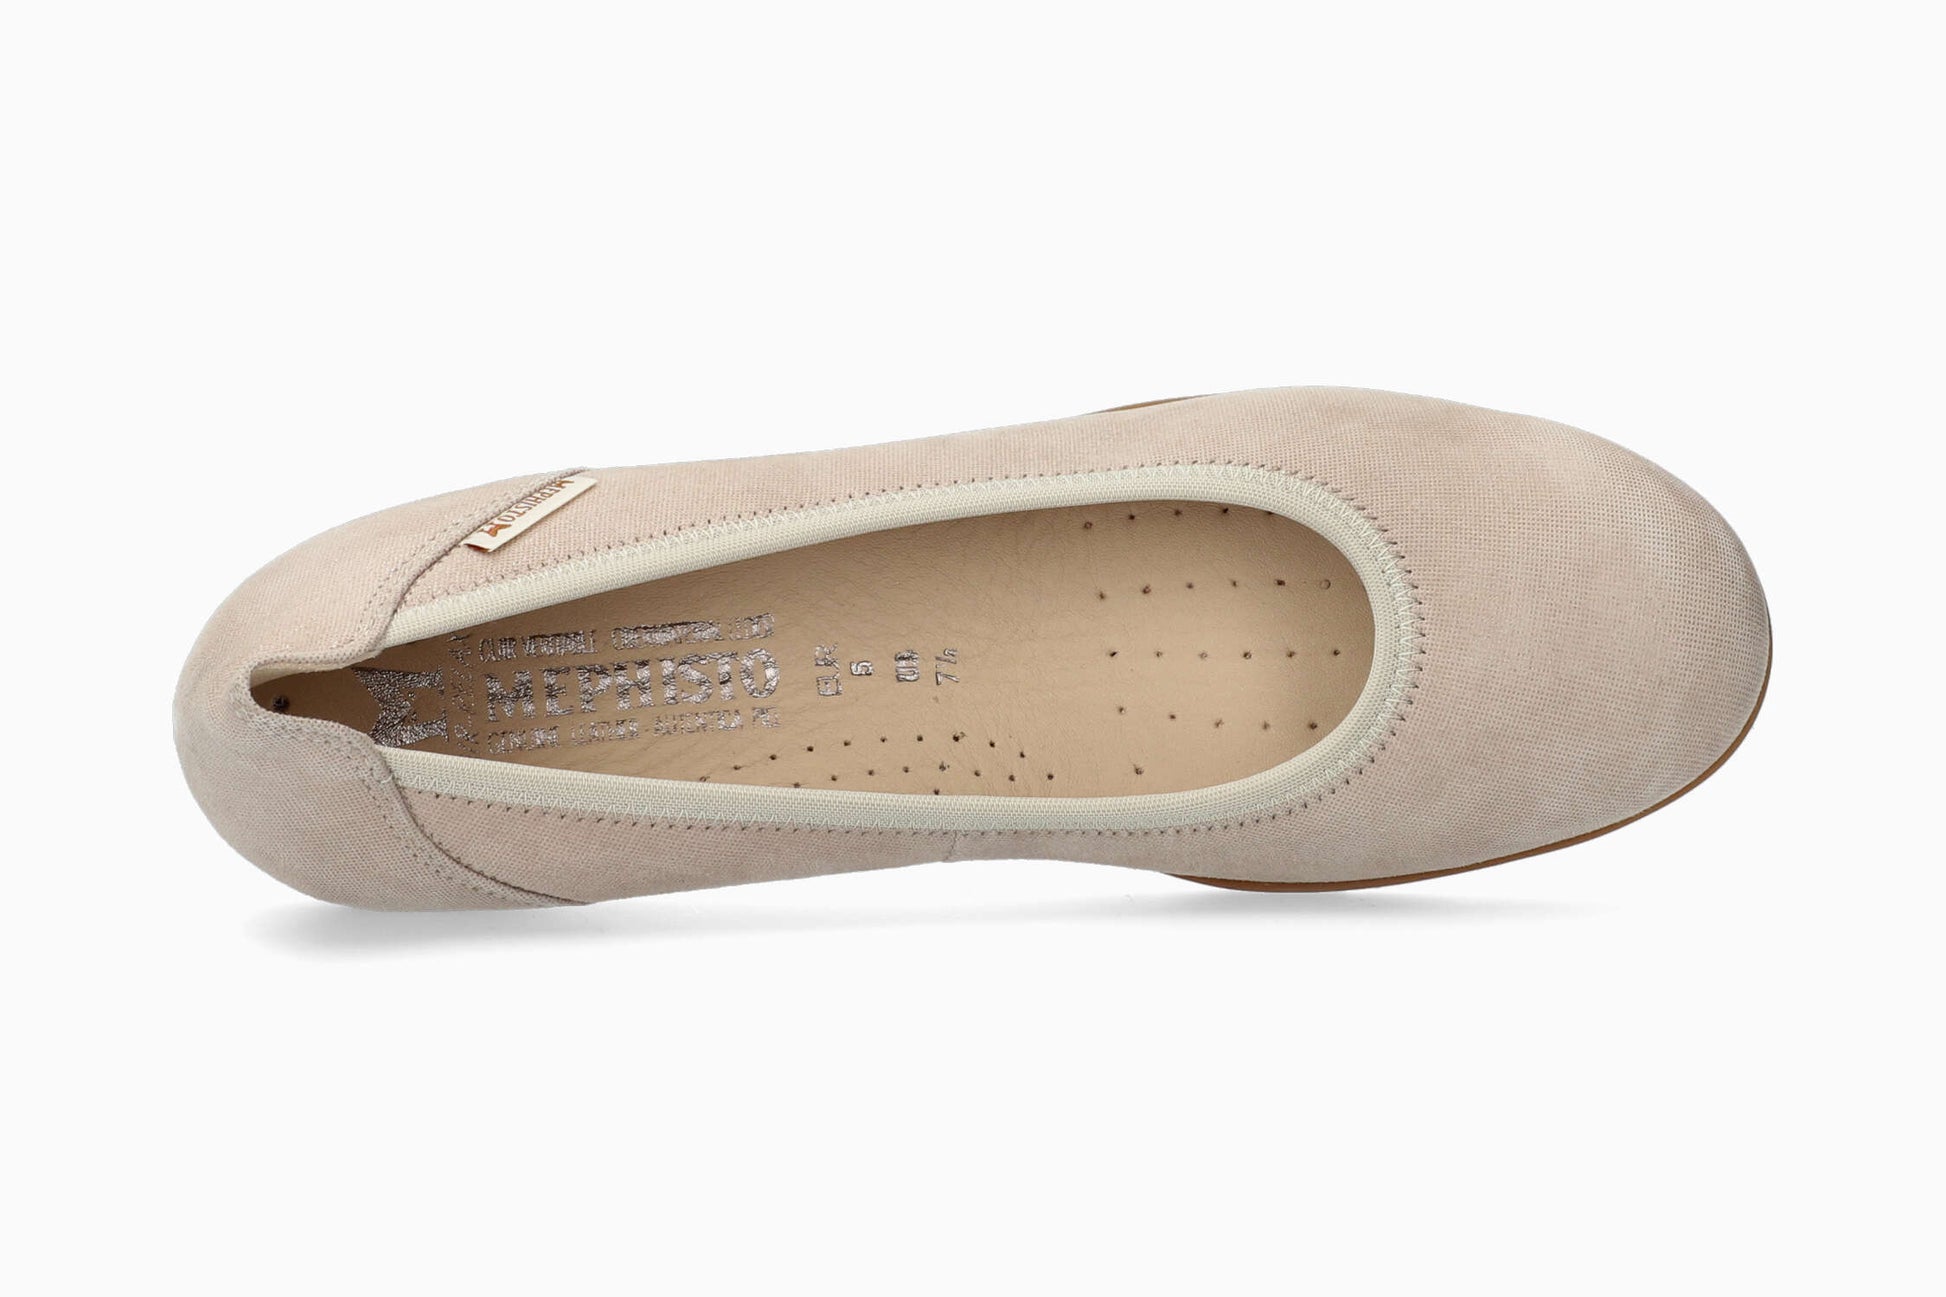 Mephisto Emilie Women's Shoe Light Taupe Top